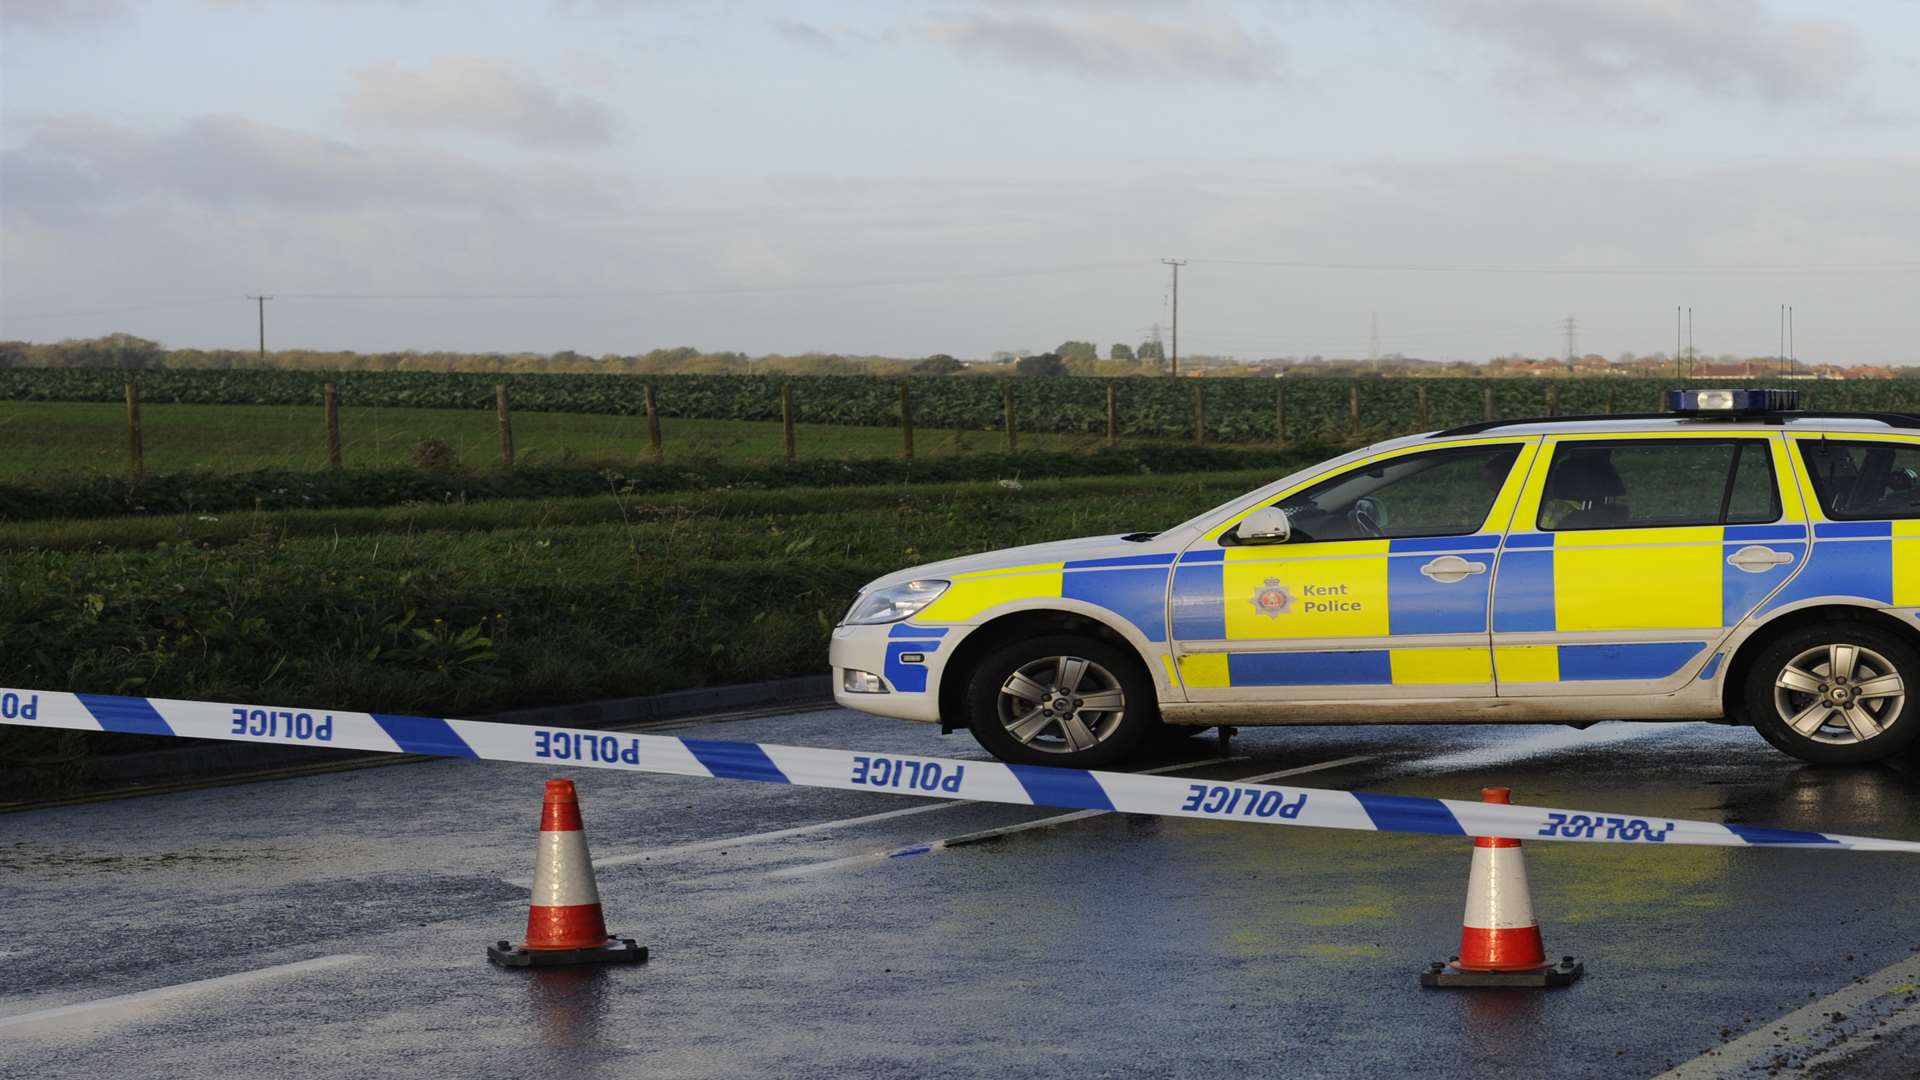 The A258 has been closed.